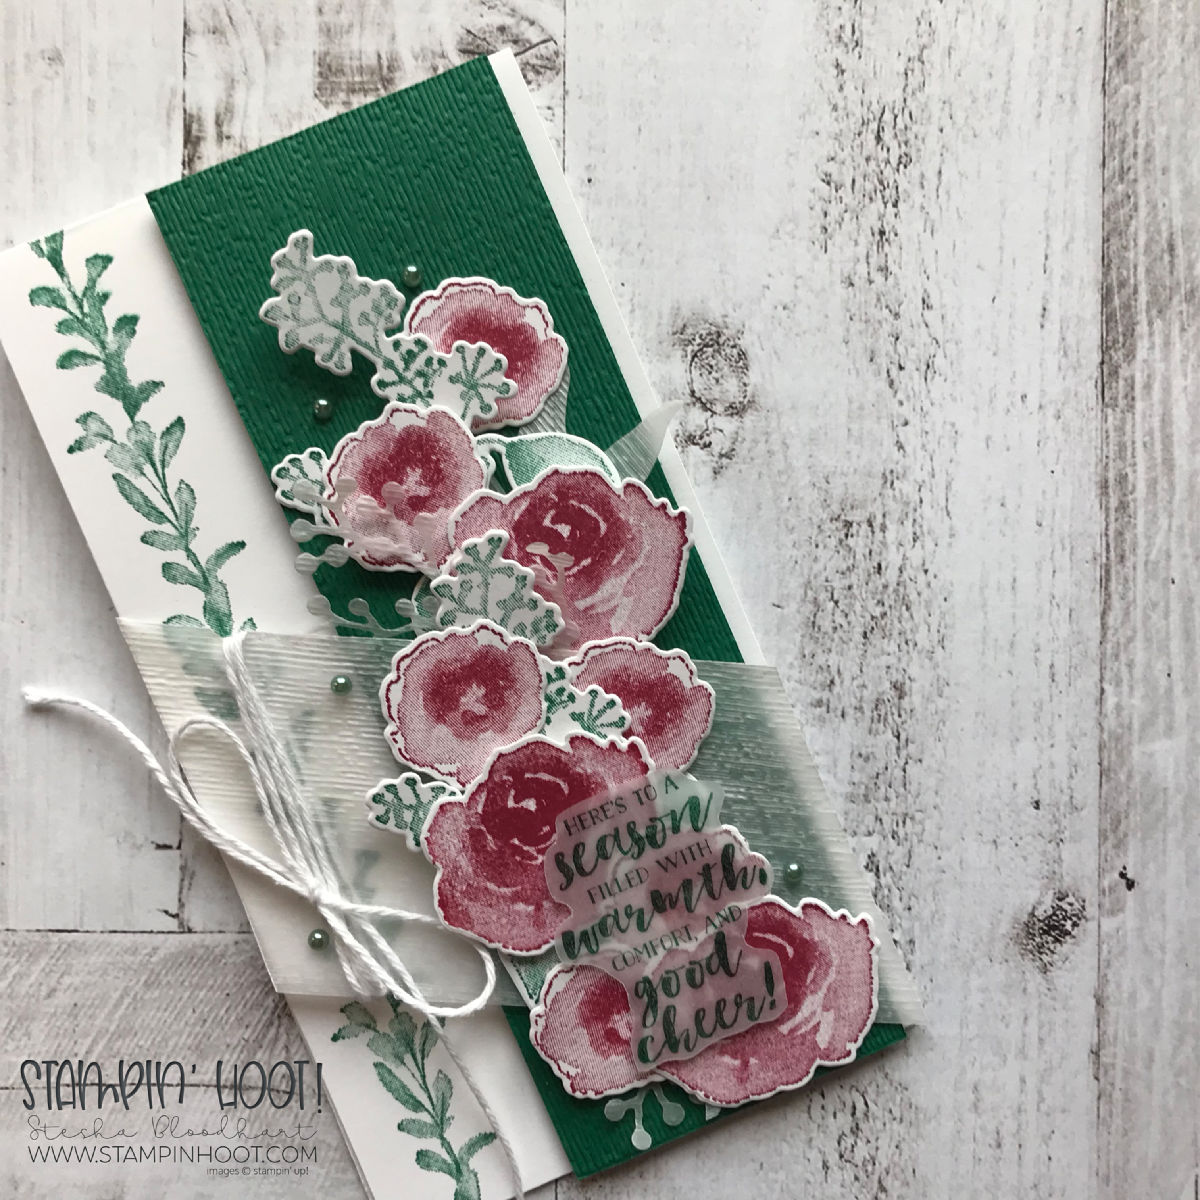 First Frost Bundle By Stampin' Up! Christmas Card by Stesha Bloodhart, Stampin' Hoot! For the Stamp Review Crew Blog Hop. #steshabloodhart #stampinhoot